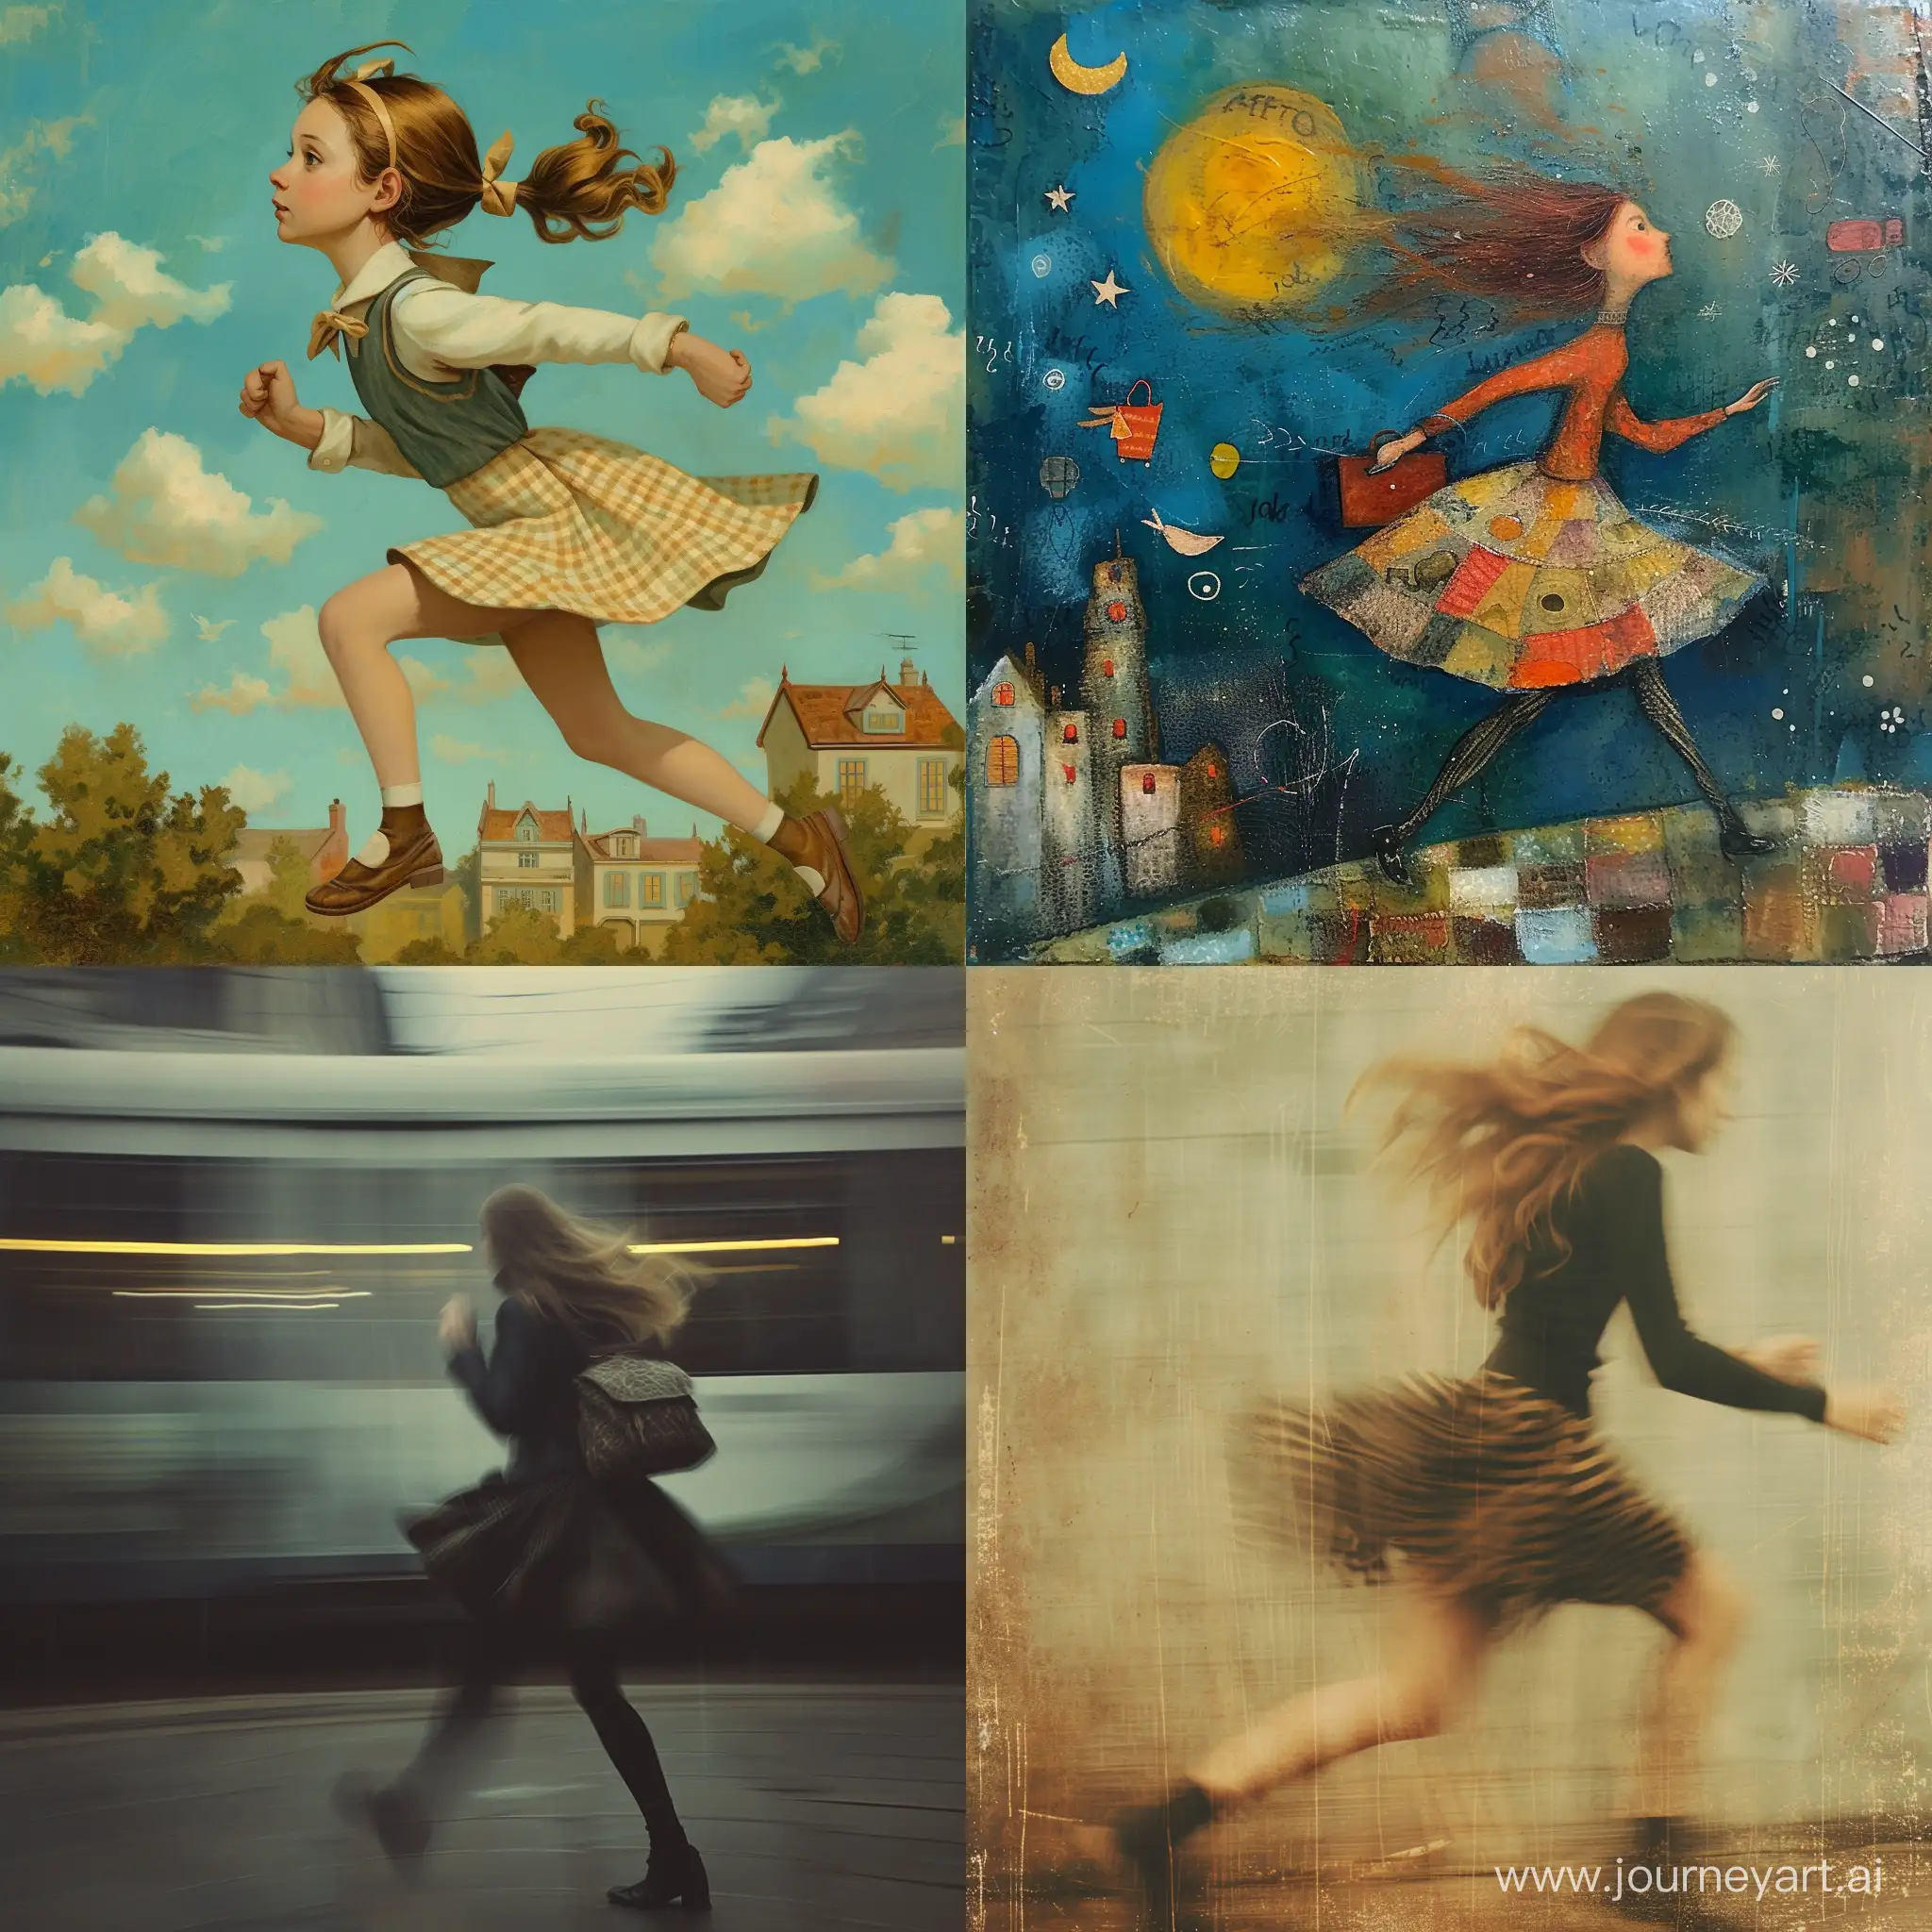 A girl in a hurry